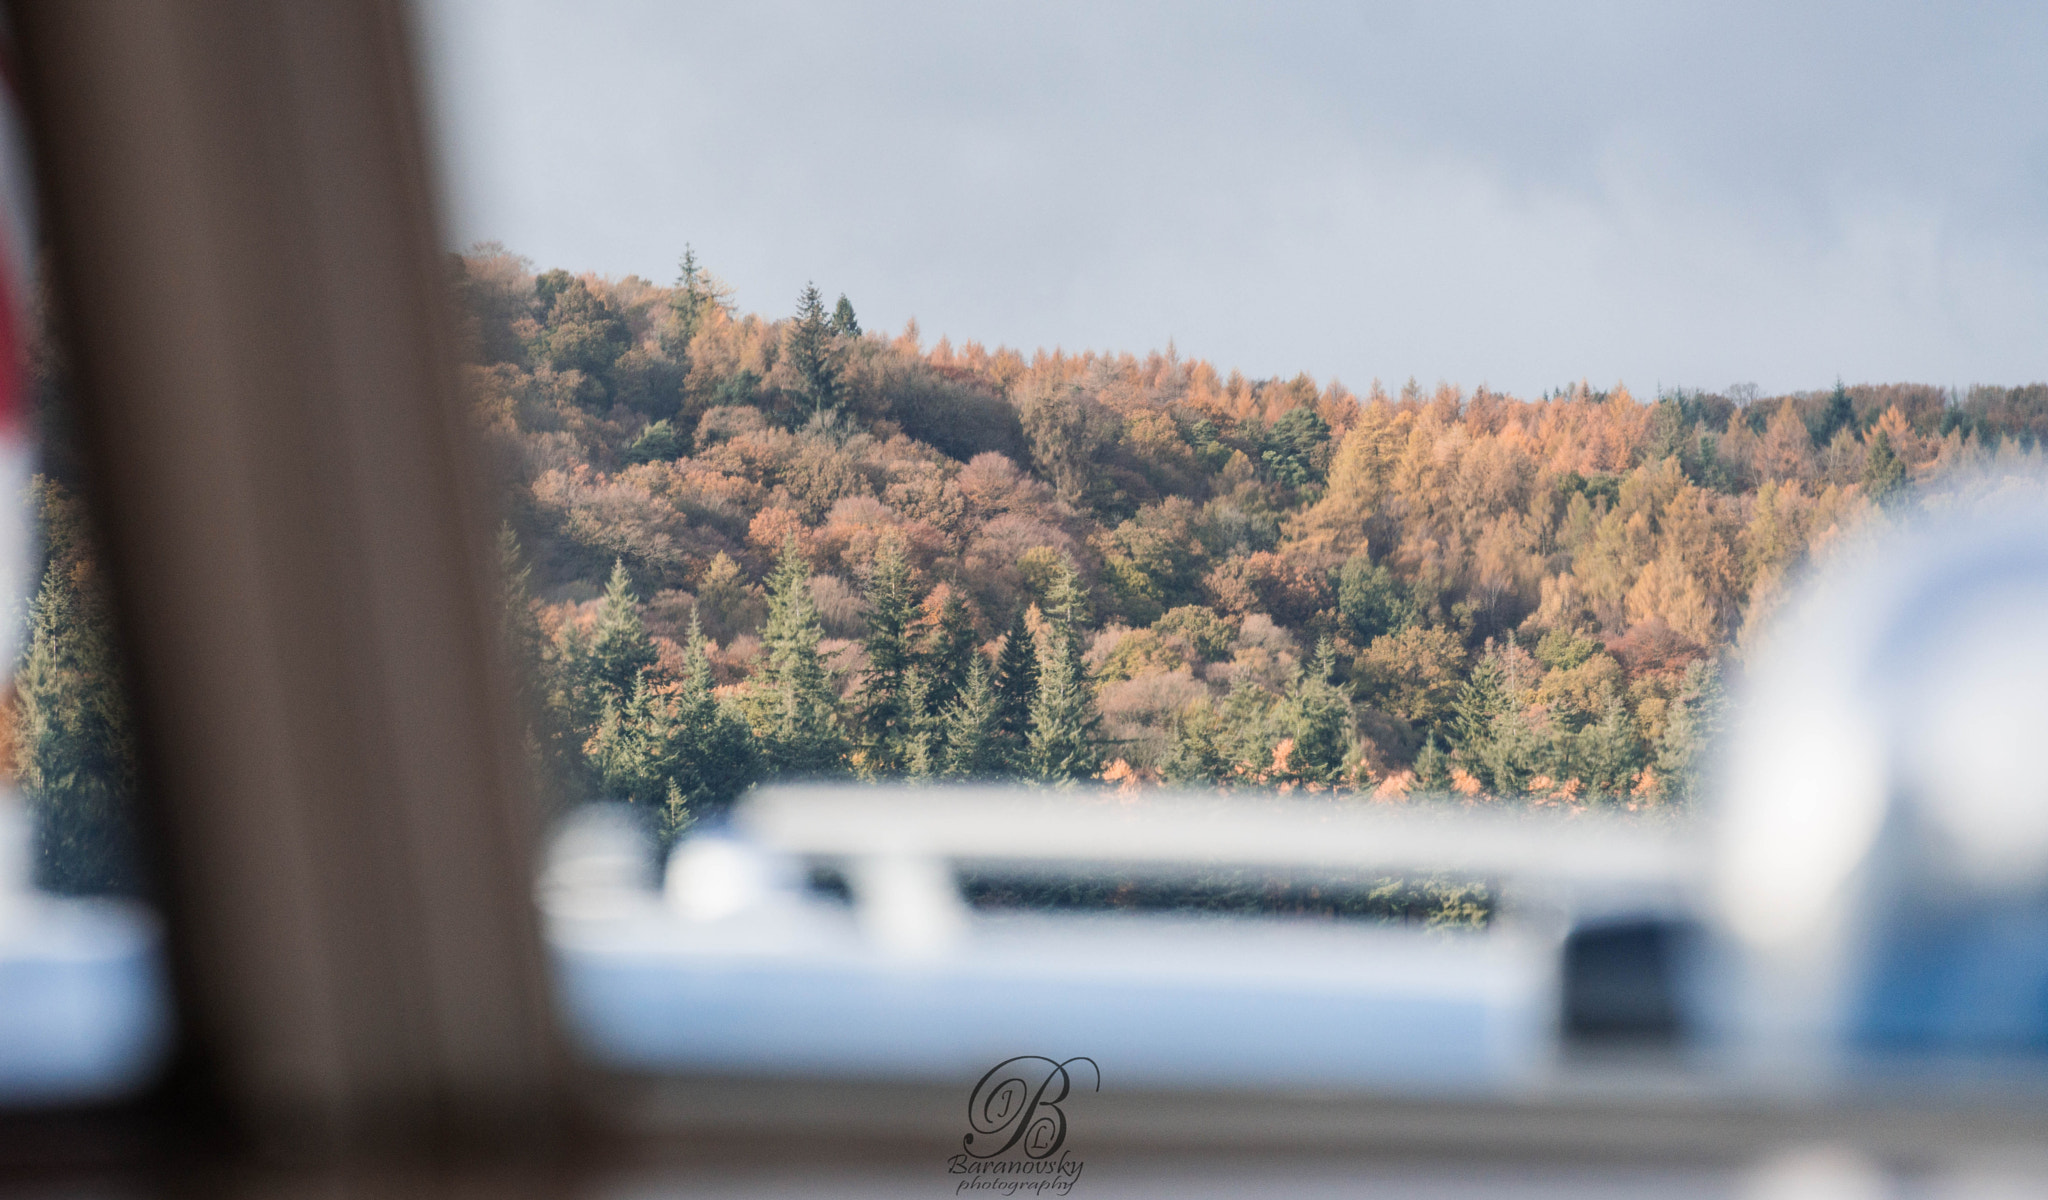 Sony a6000 sample photo. View from the boats window on windermere lake towards forest photography